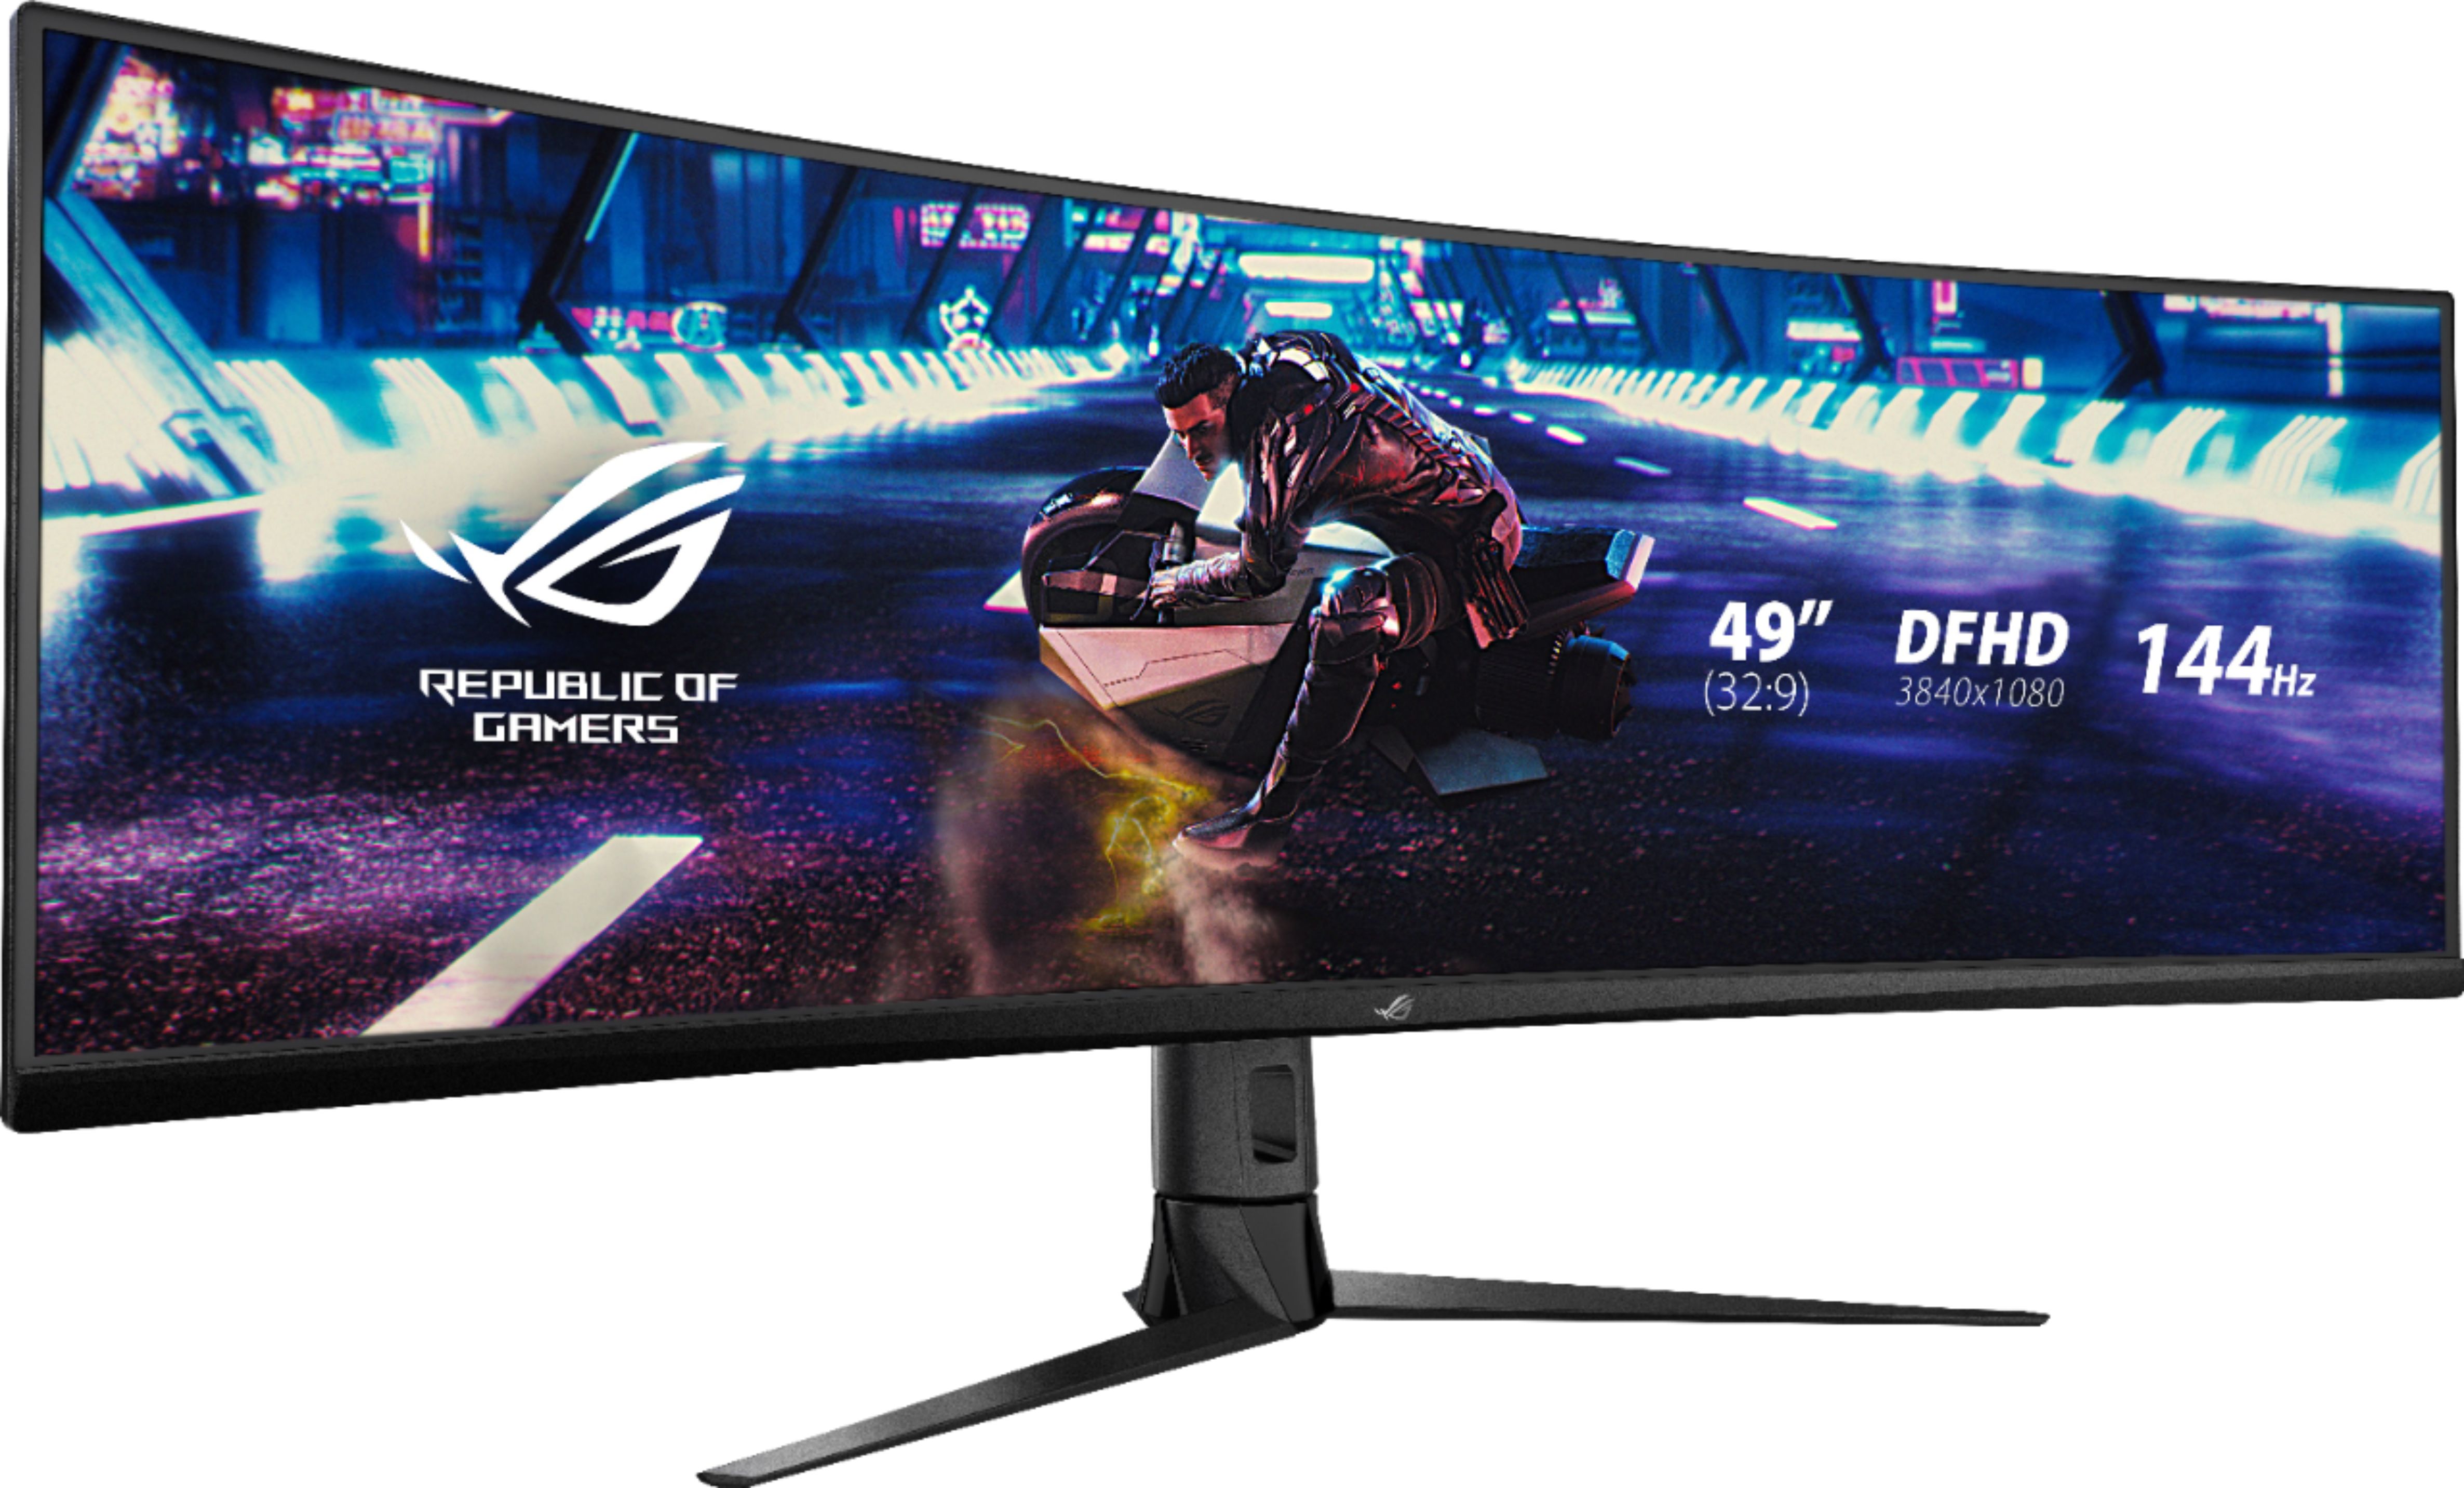 Angle View: ASUS - Geek Squad Certified Refurbished 49" LED Curved FHD FreeSync Monitor with HDR - Black